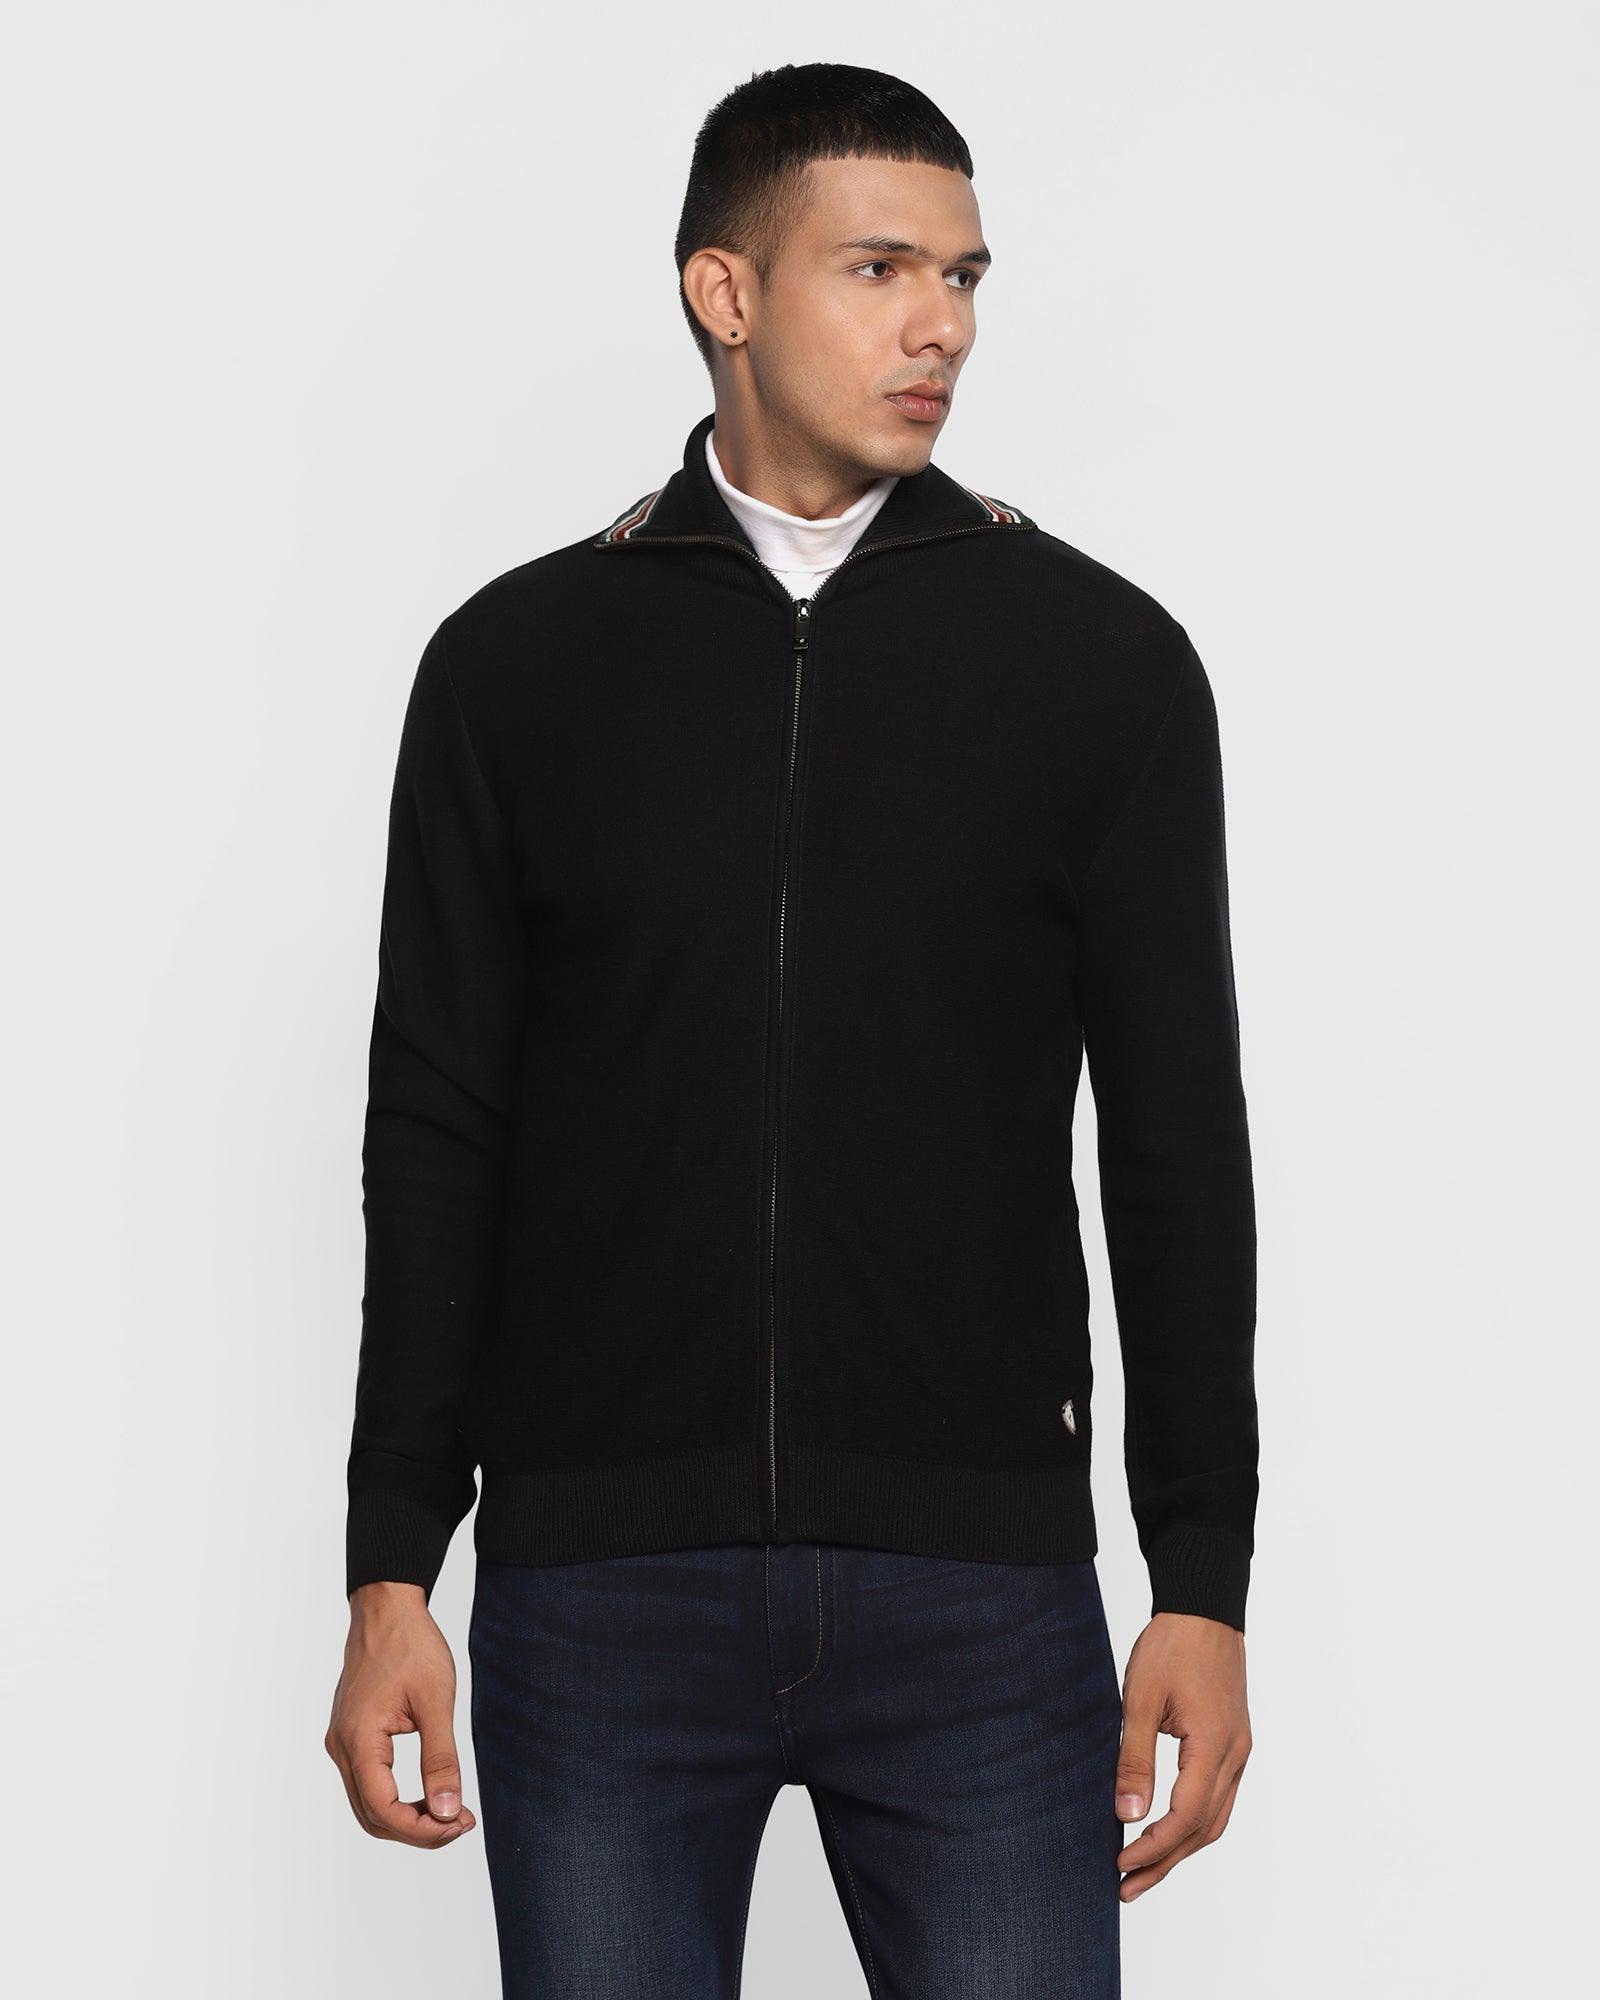 Stylized Collar Jet Black Solid Sweater - Christopher